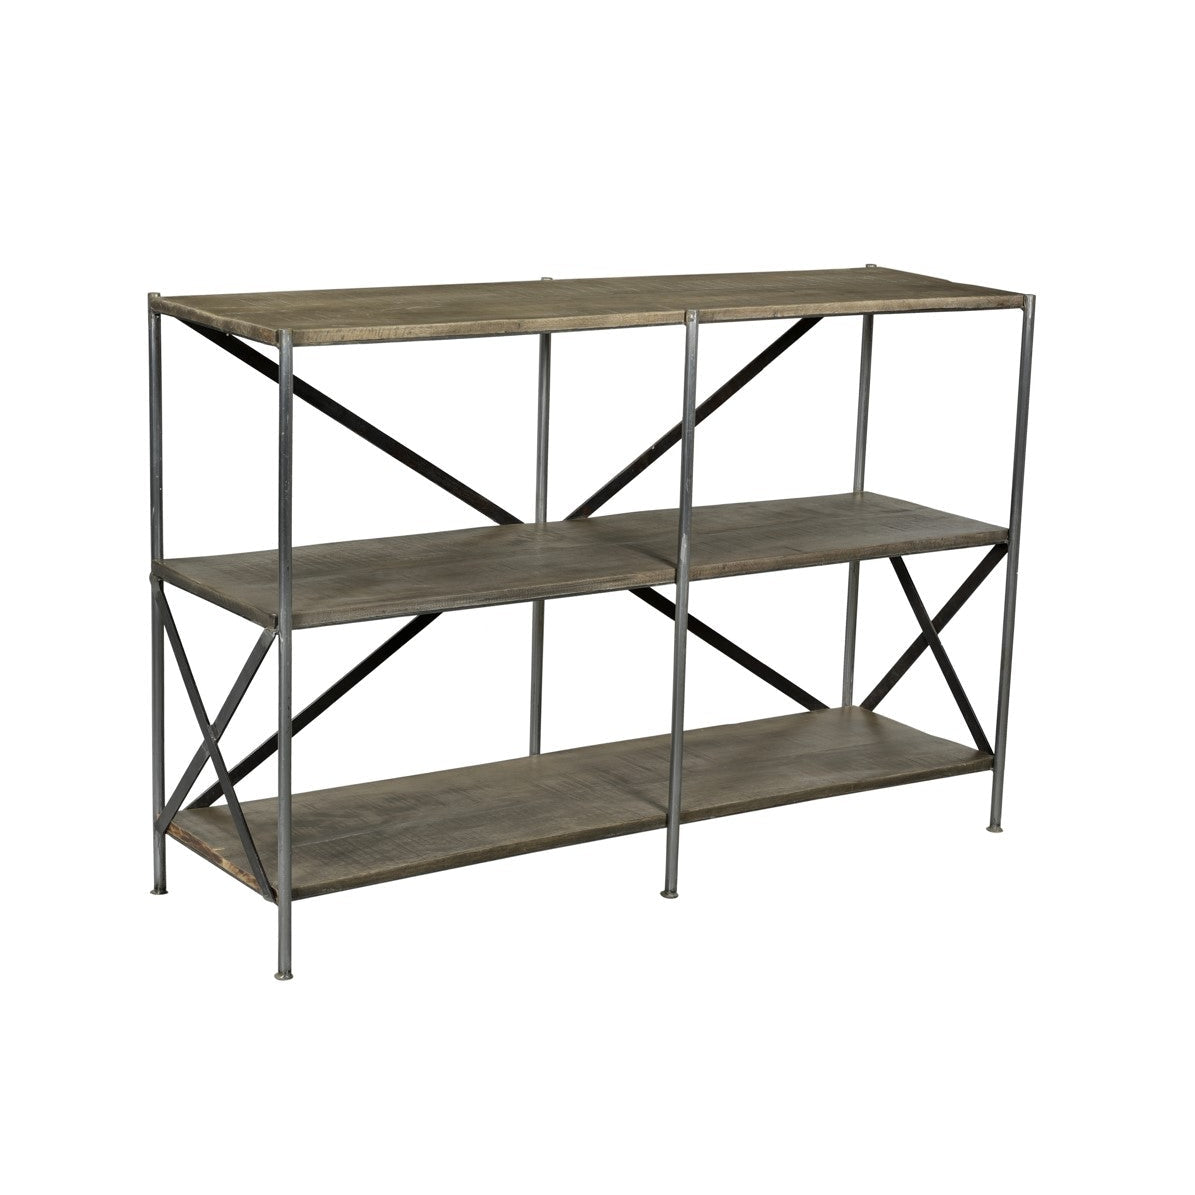 Crestview Collection Bengal Manor 54" x 16" x 36" Rustic Mango Wood And Scraped Iron Tiered Console Table In Parkview Gray Finish